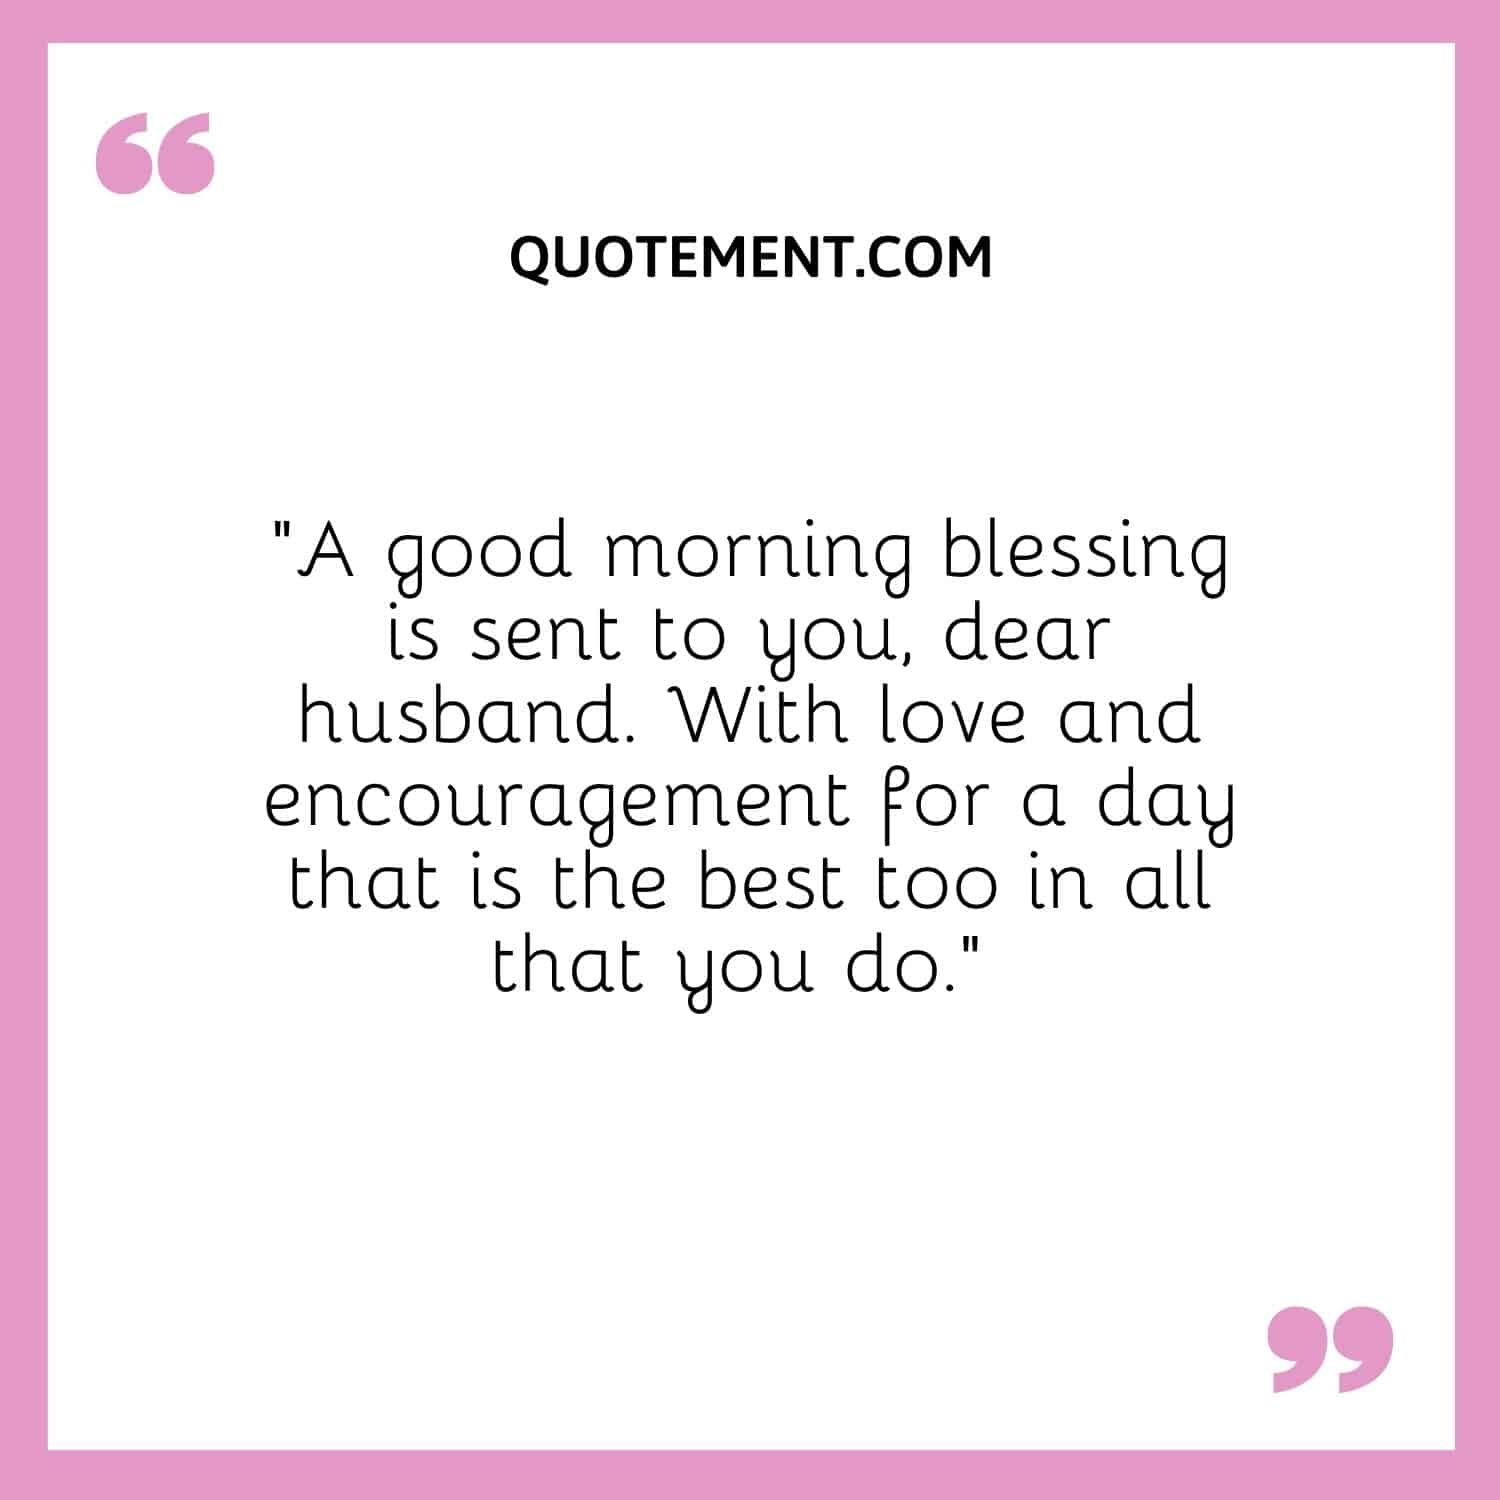 A good morning blessing is sent to you, dear husband